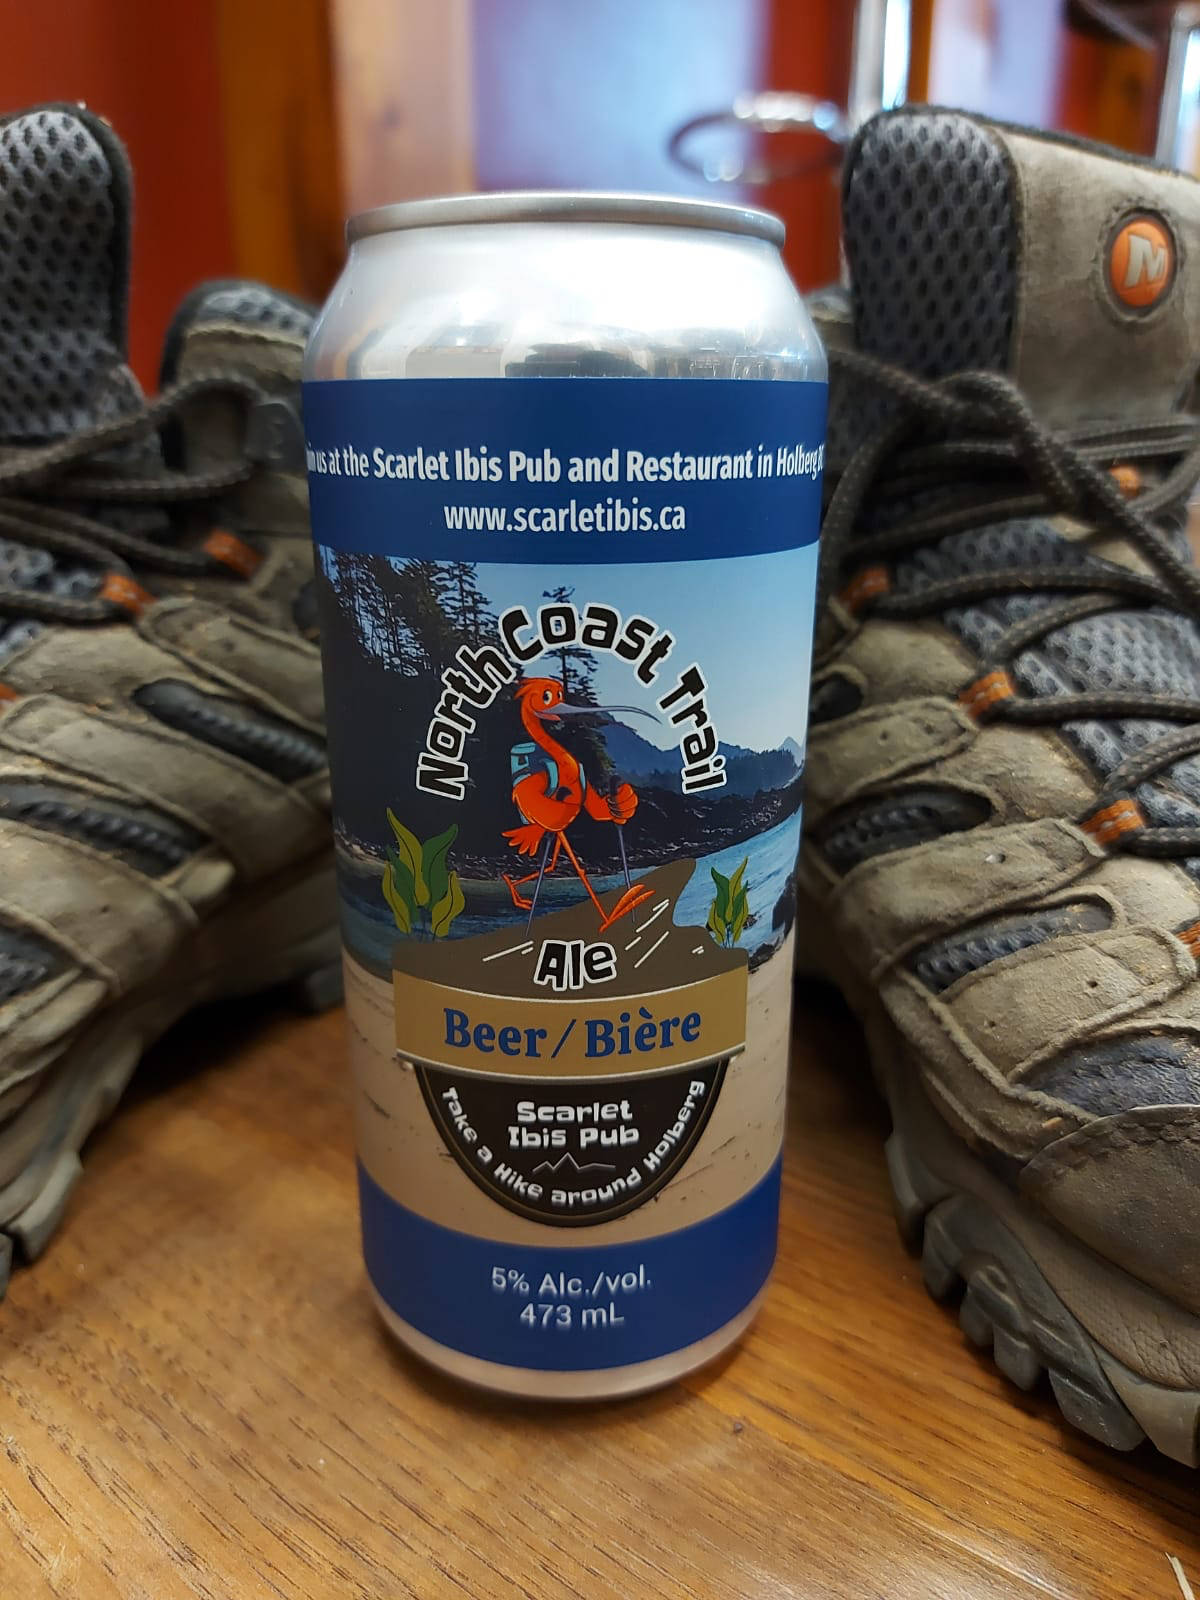 The North Coast Trail Ale is not only a great northwest pale ale, its destined to make Cape Scott Provincial Park and the North Coast Trail even better.